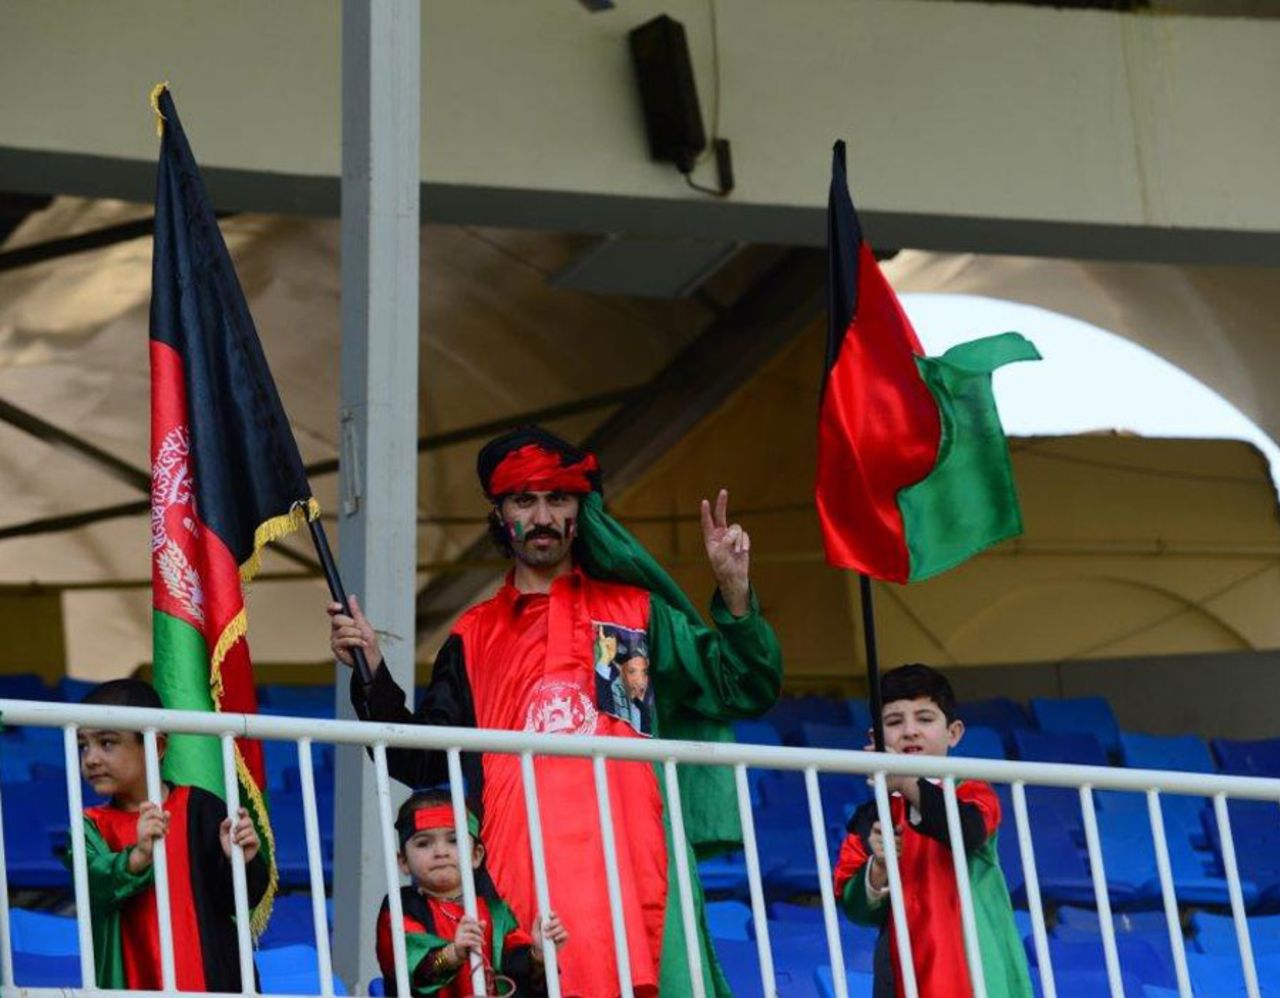 Afghanistan fans turn out to support their team during the match against Kenya, Afghanistan v Kenya, WCL Championship, Sharjah, October 4, 2013